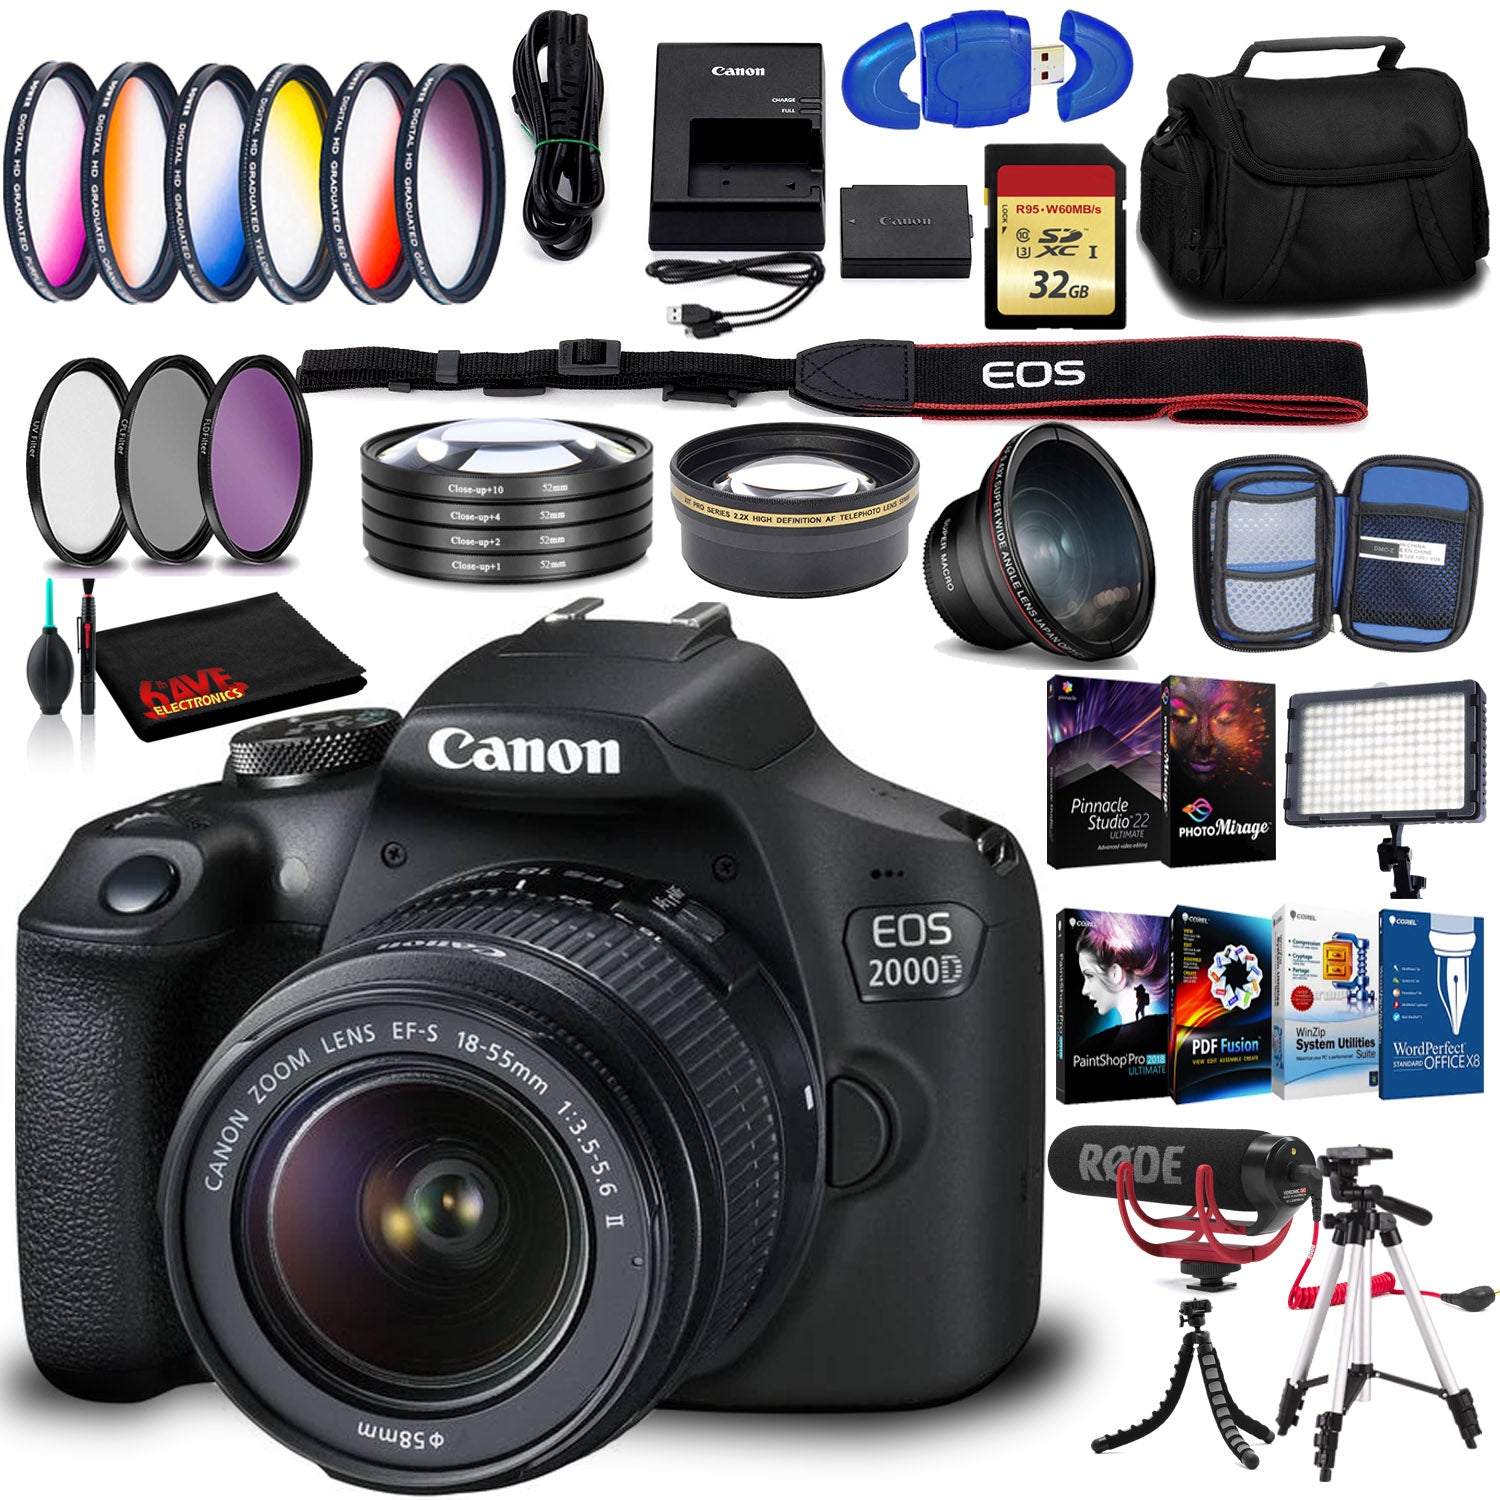 Canon EOS 2000D DSLR with EF-S 18-55mm f/3.5-5.6 IS II Lens (Intl Model) with 32GB Memory Kit, LED Light, Mic, and More